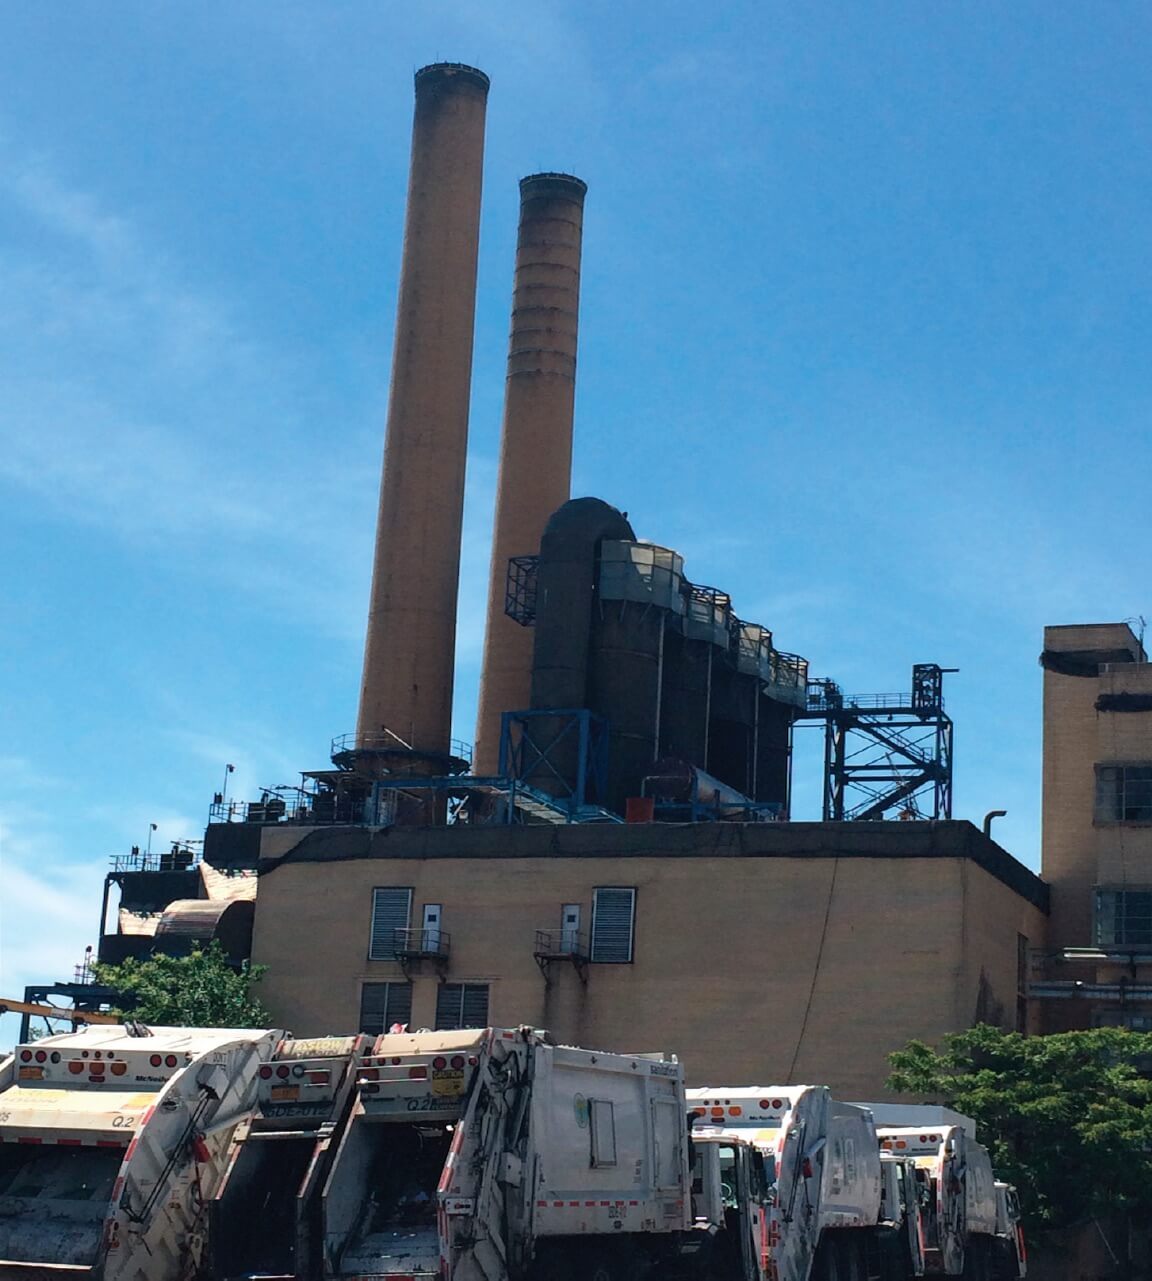 The inactive Maspeth incinerator as shown in this 2016 photo.